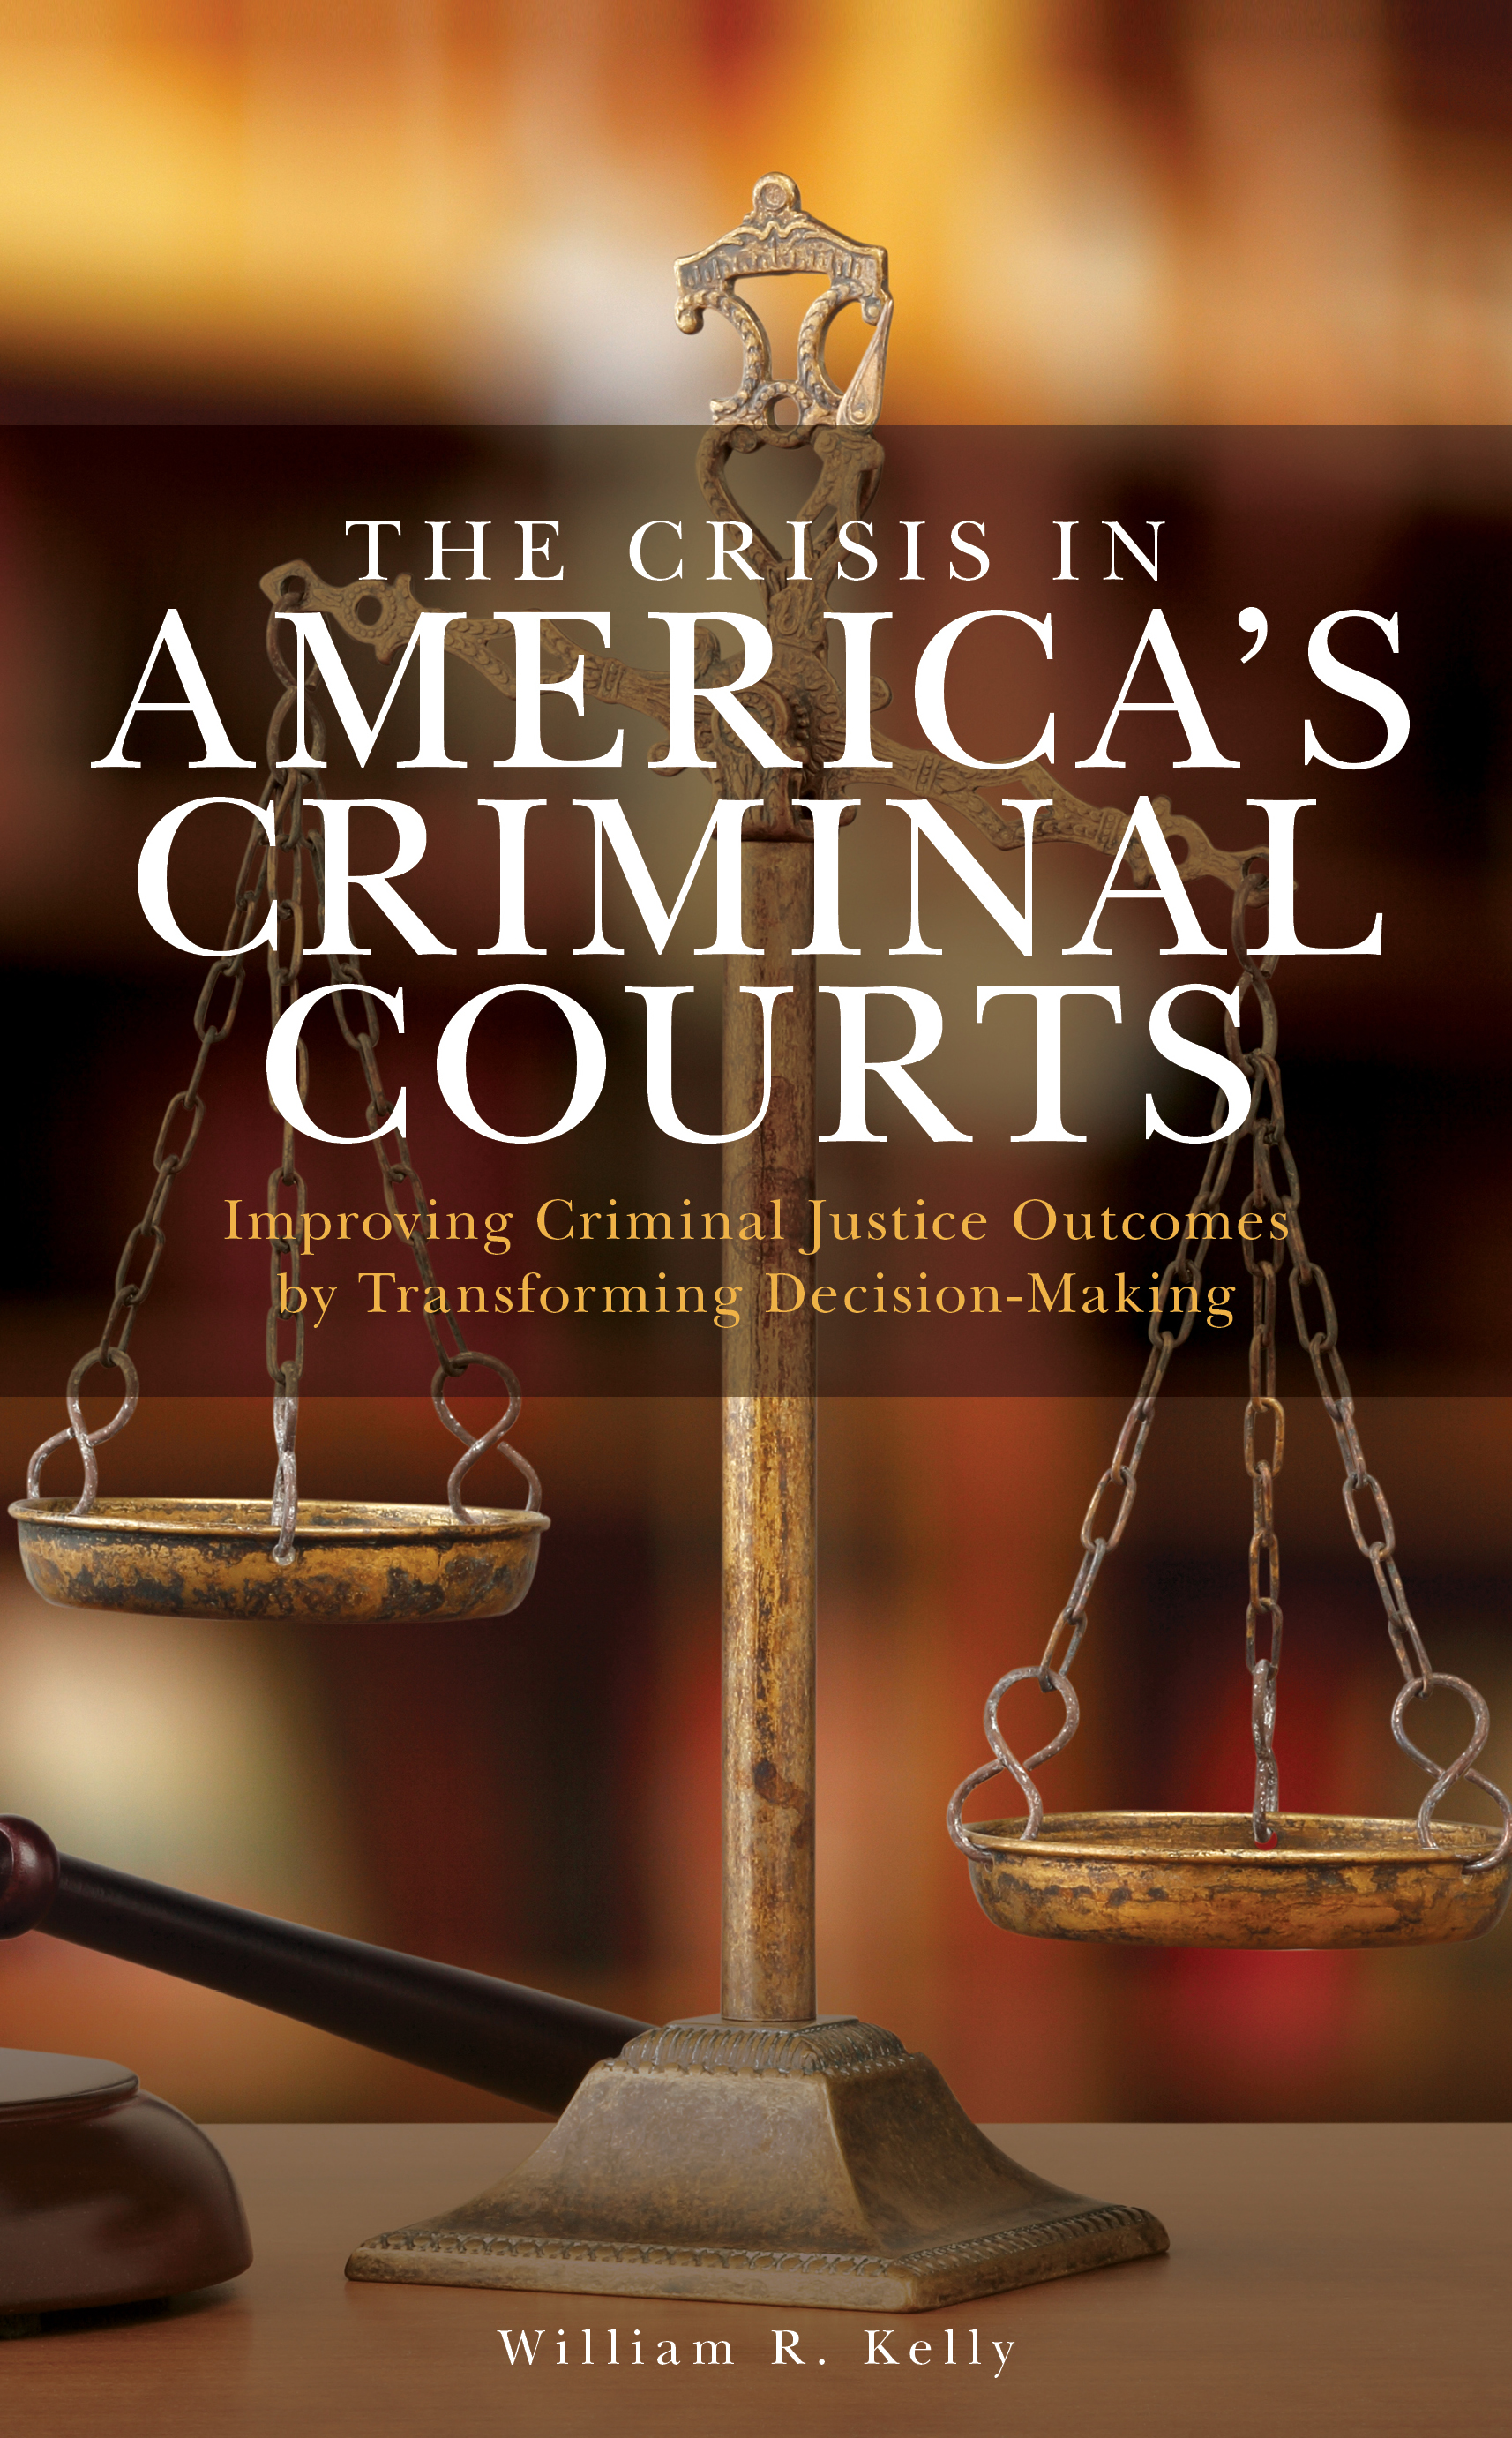 The Crisis in America's Criminal Courts: Improving Criminal Justice Outcomes by Transforming Decision-Making